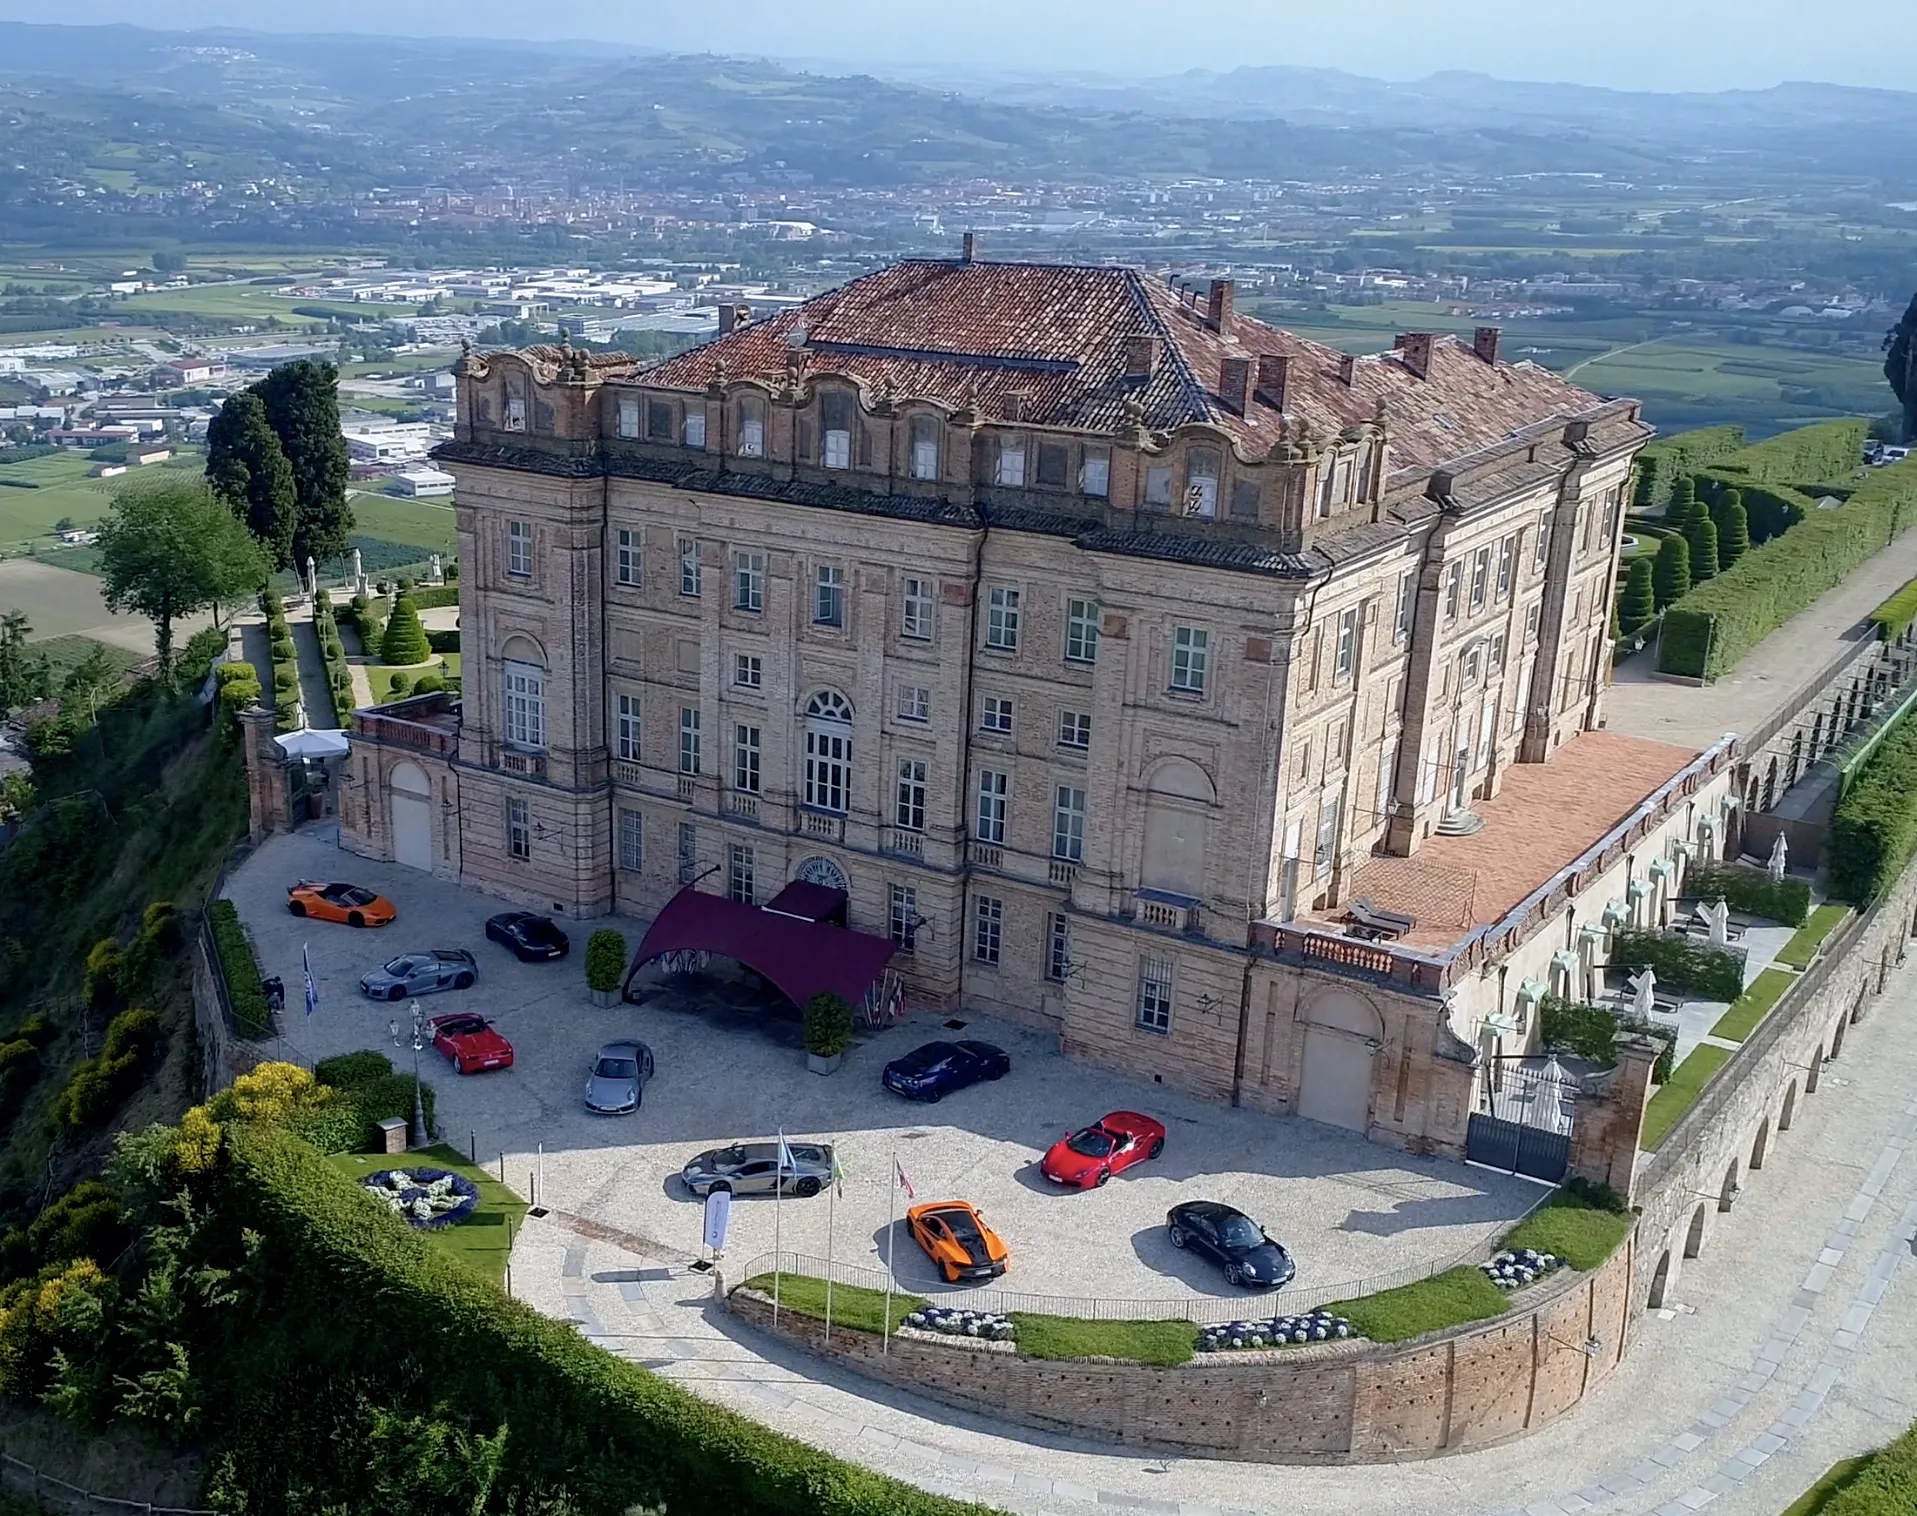 Stay in a luxury castle as part of the supercar drive on this European F1 tour